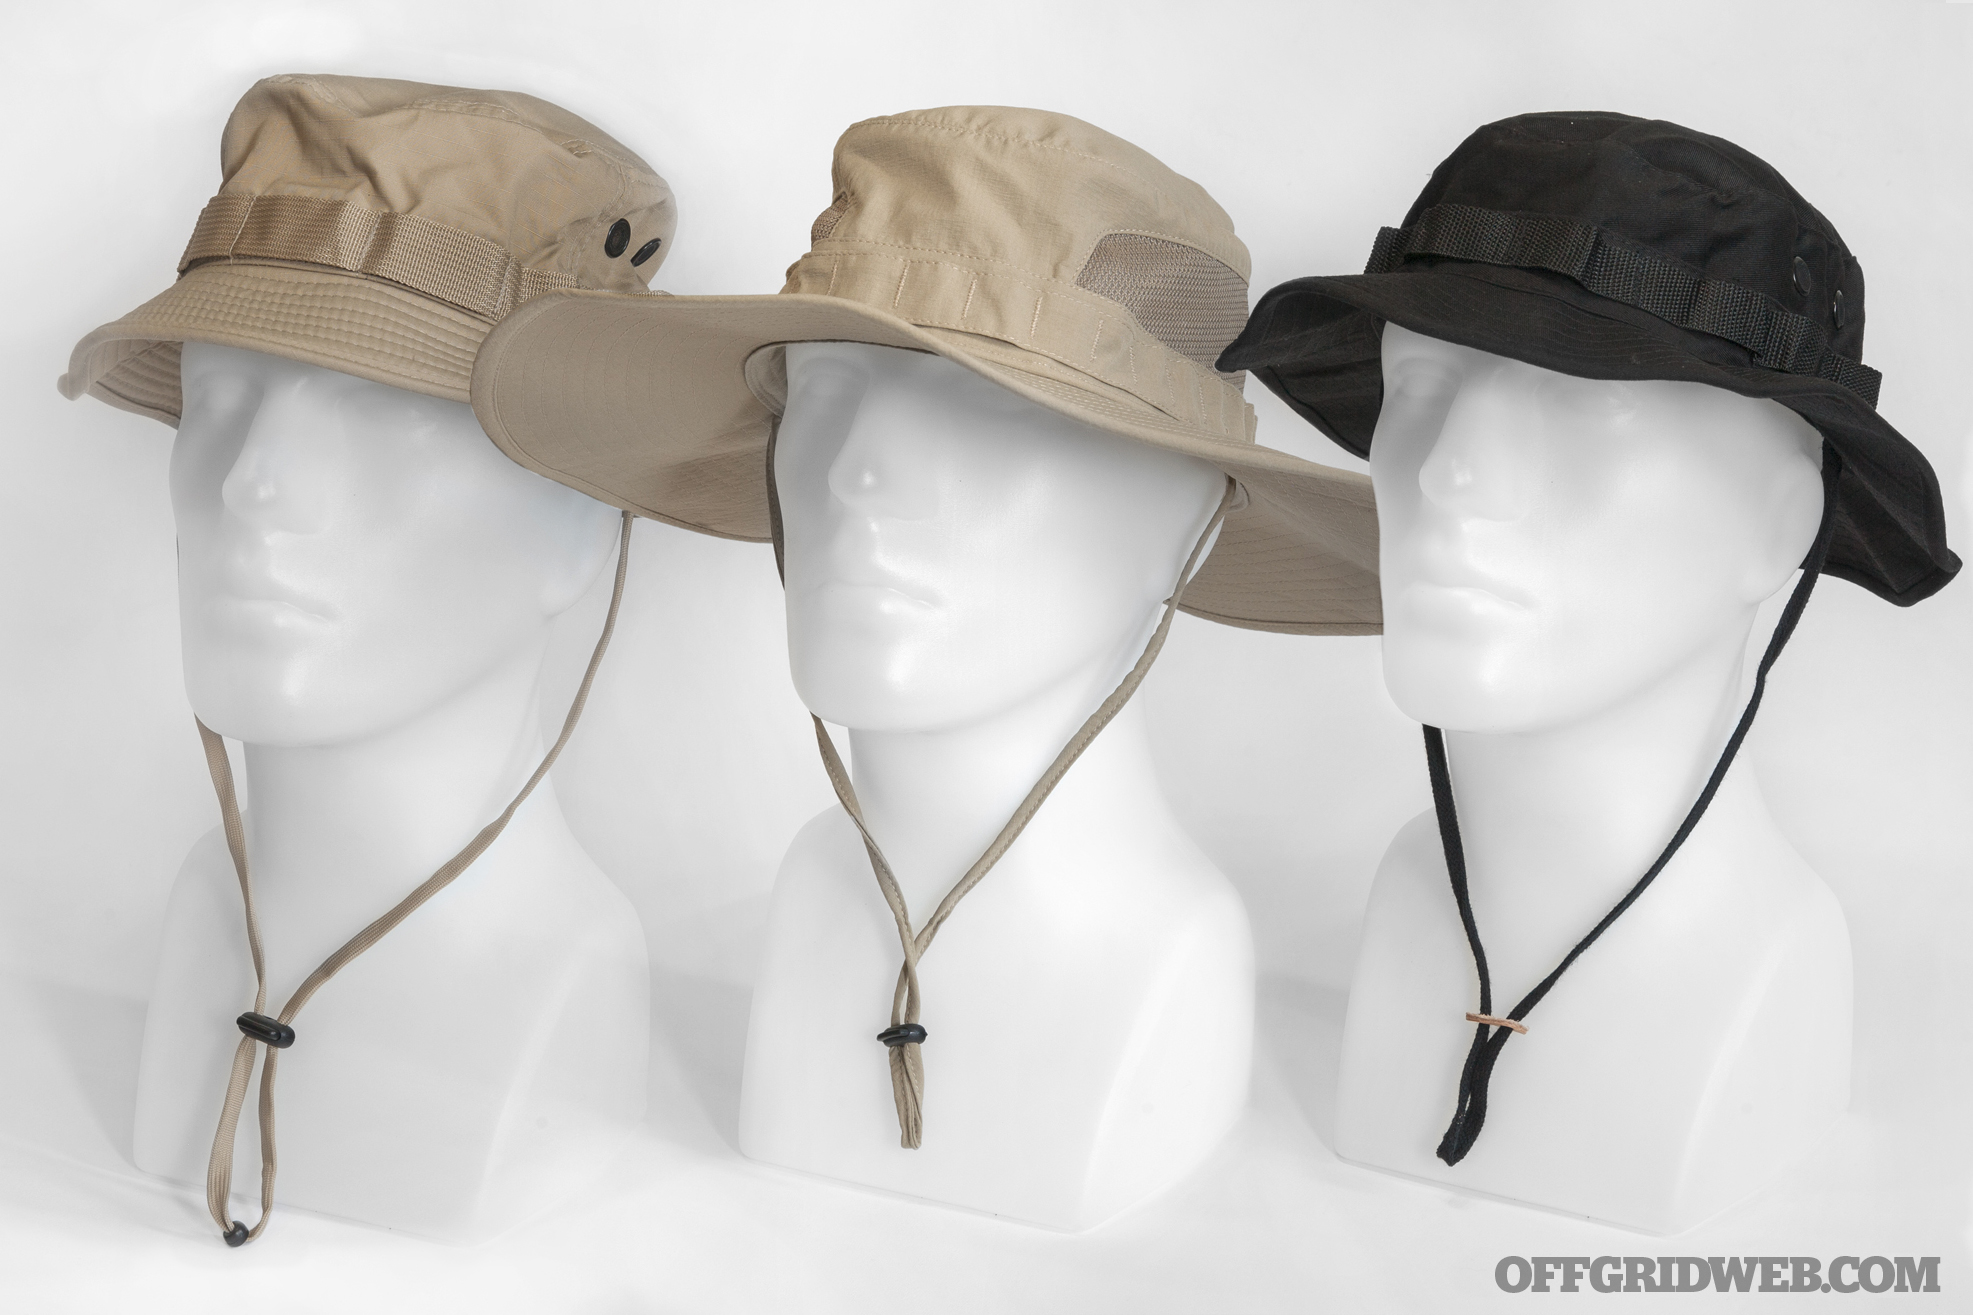 https://www.offgridweb.com/wp-content/uploads/2018/04/Boonie-hat-buyers-guide-lead-photo.jpg